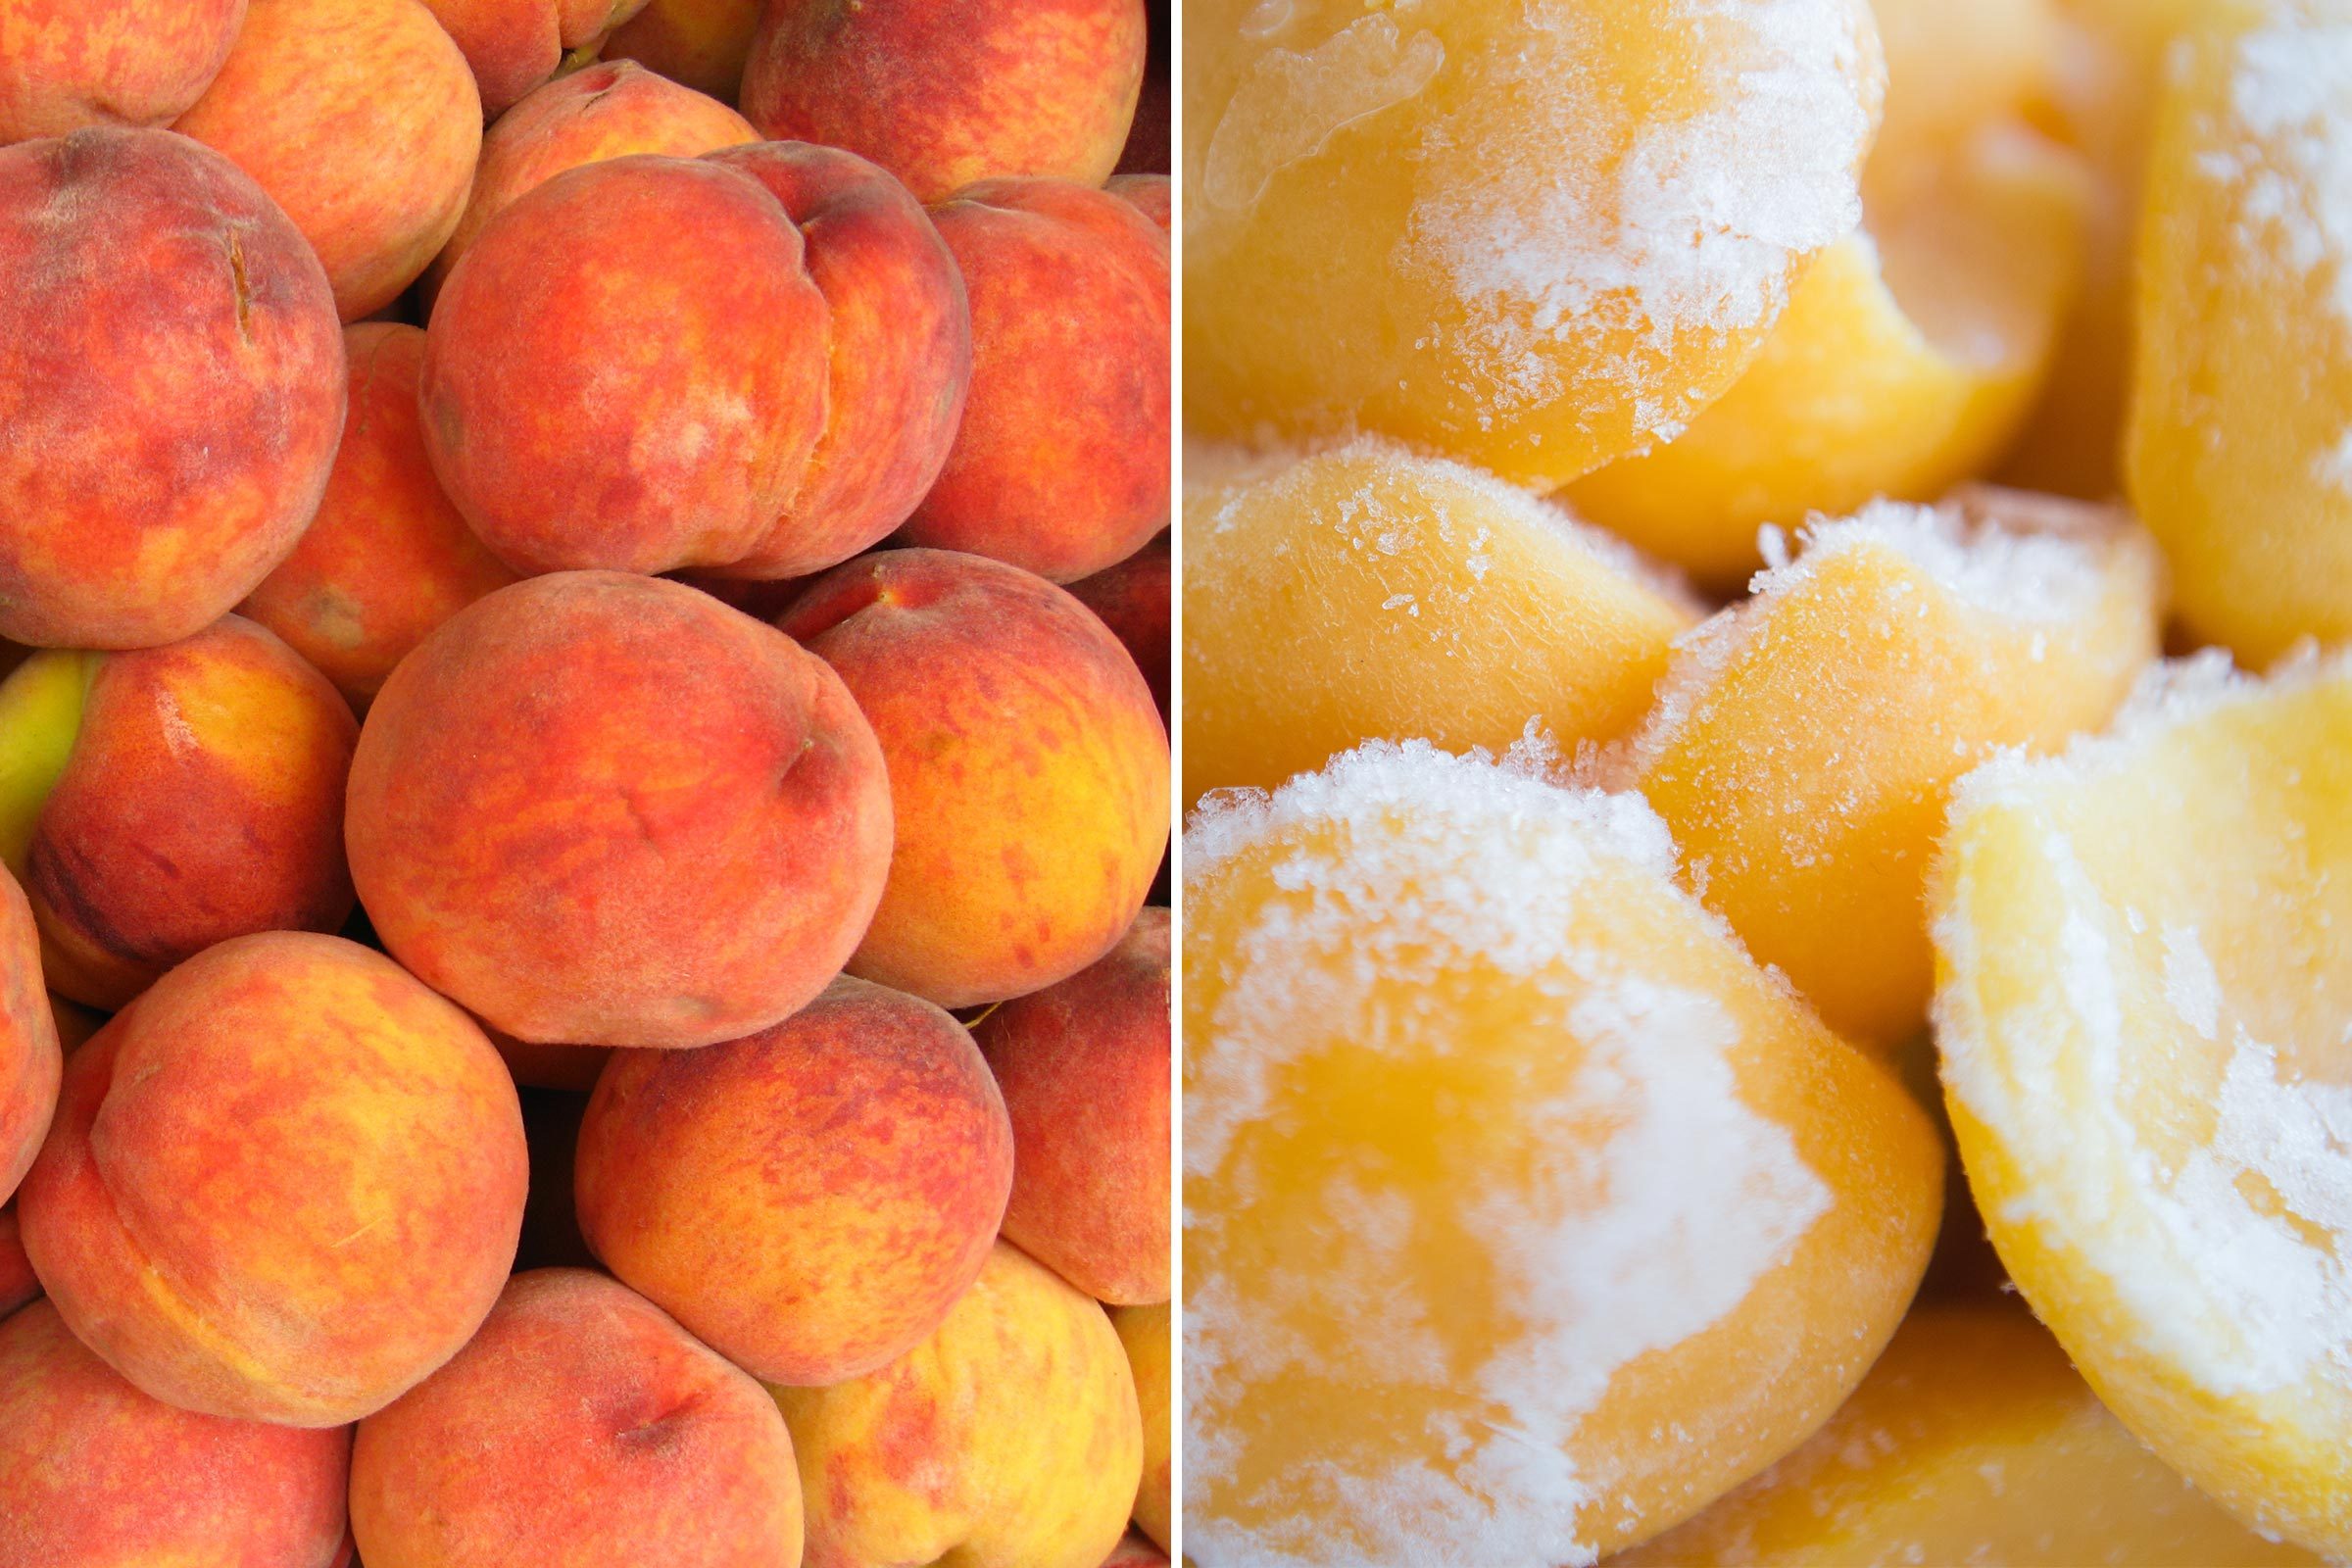 Peach Equivalents and Substitutions